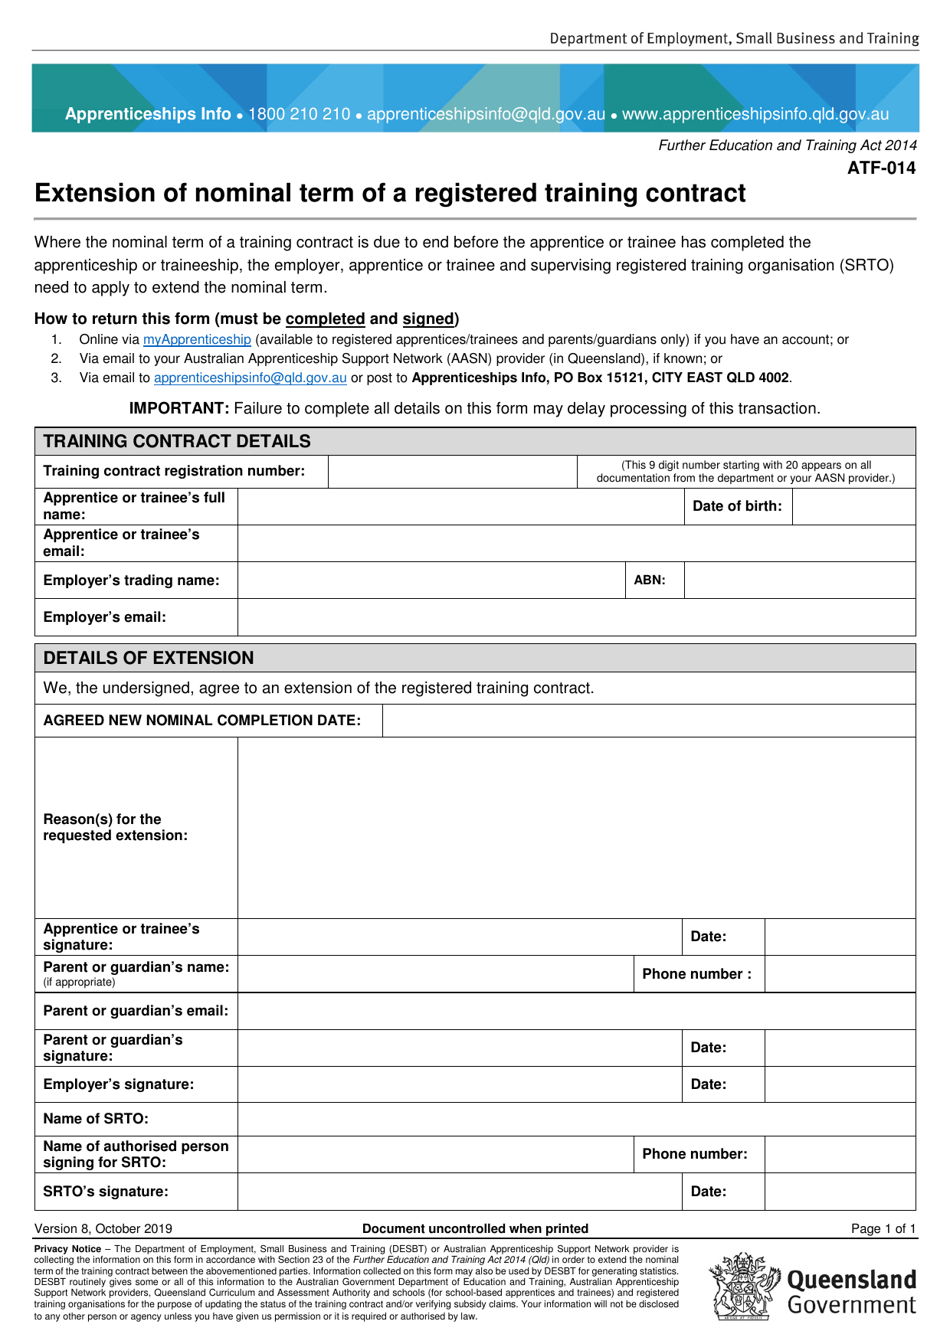 Form ATF-014 Extension of Nominal Term of a Registered Training Contract - Queensland, Australia, Page 1